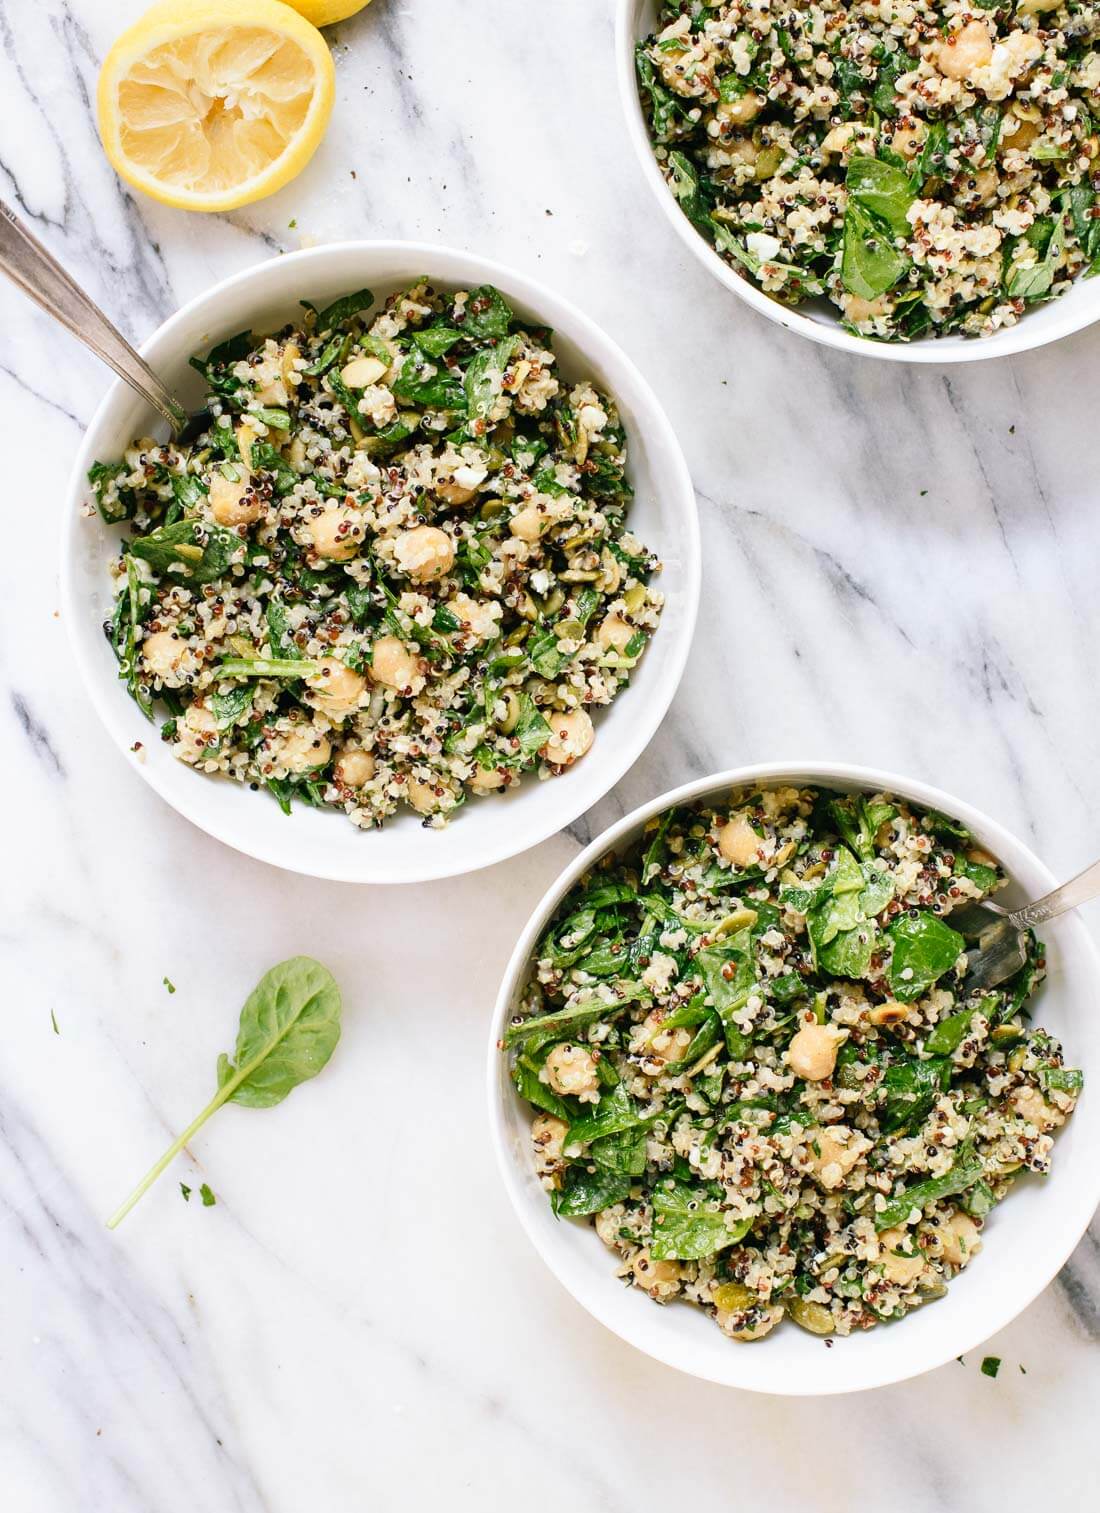 Healthy and delicious quinoa chickpea salad with lots of herbs - cookieandkate.com